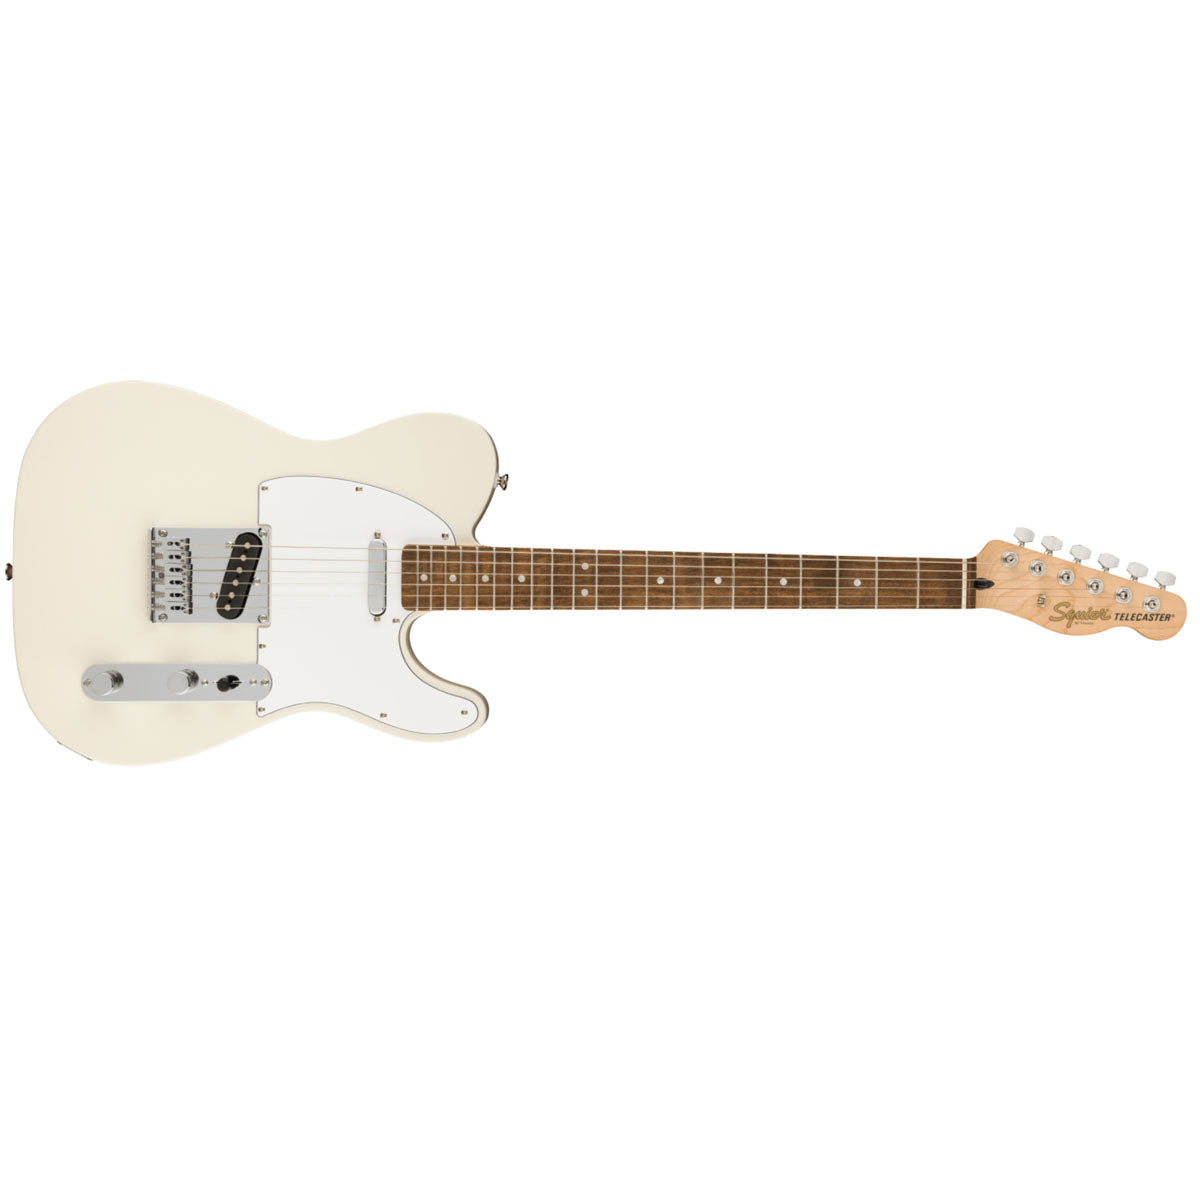 Fender Squier Affinity Series Telecaster Electric Guitar Olympic White - 0378200505